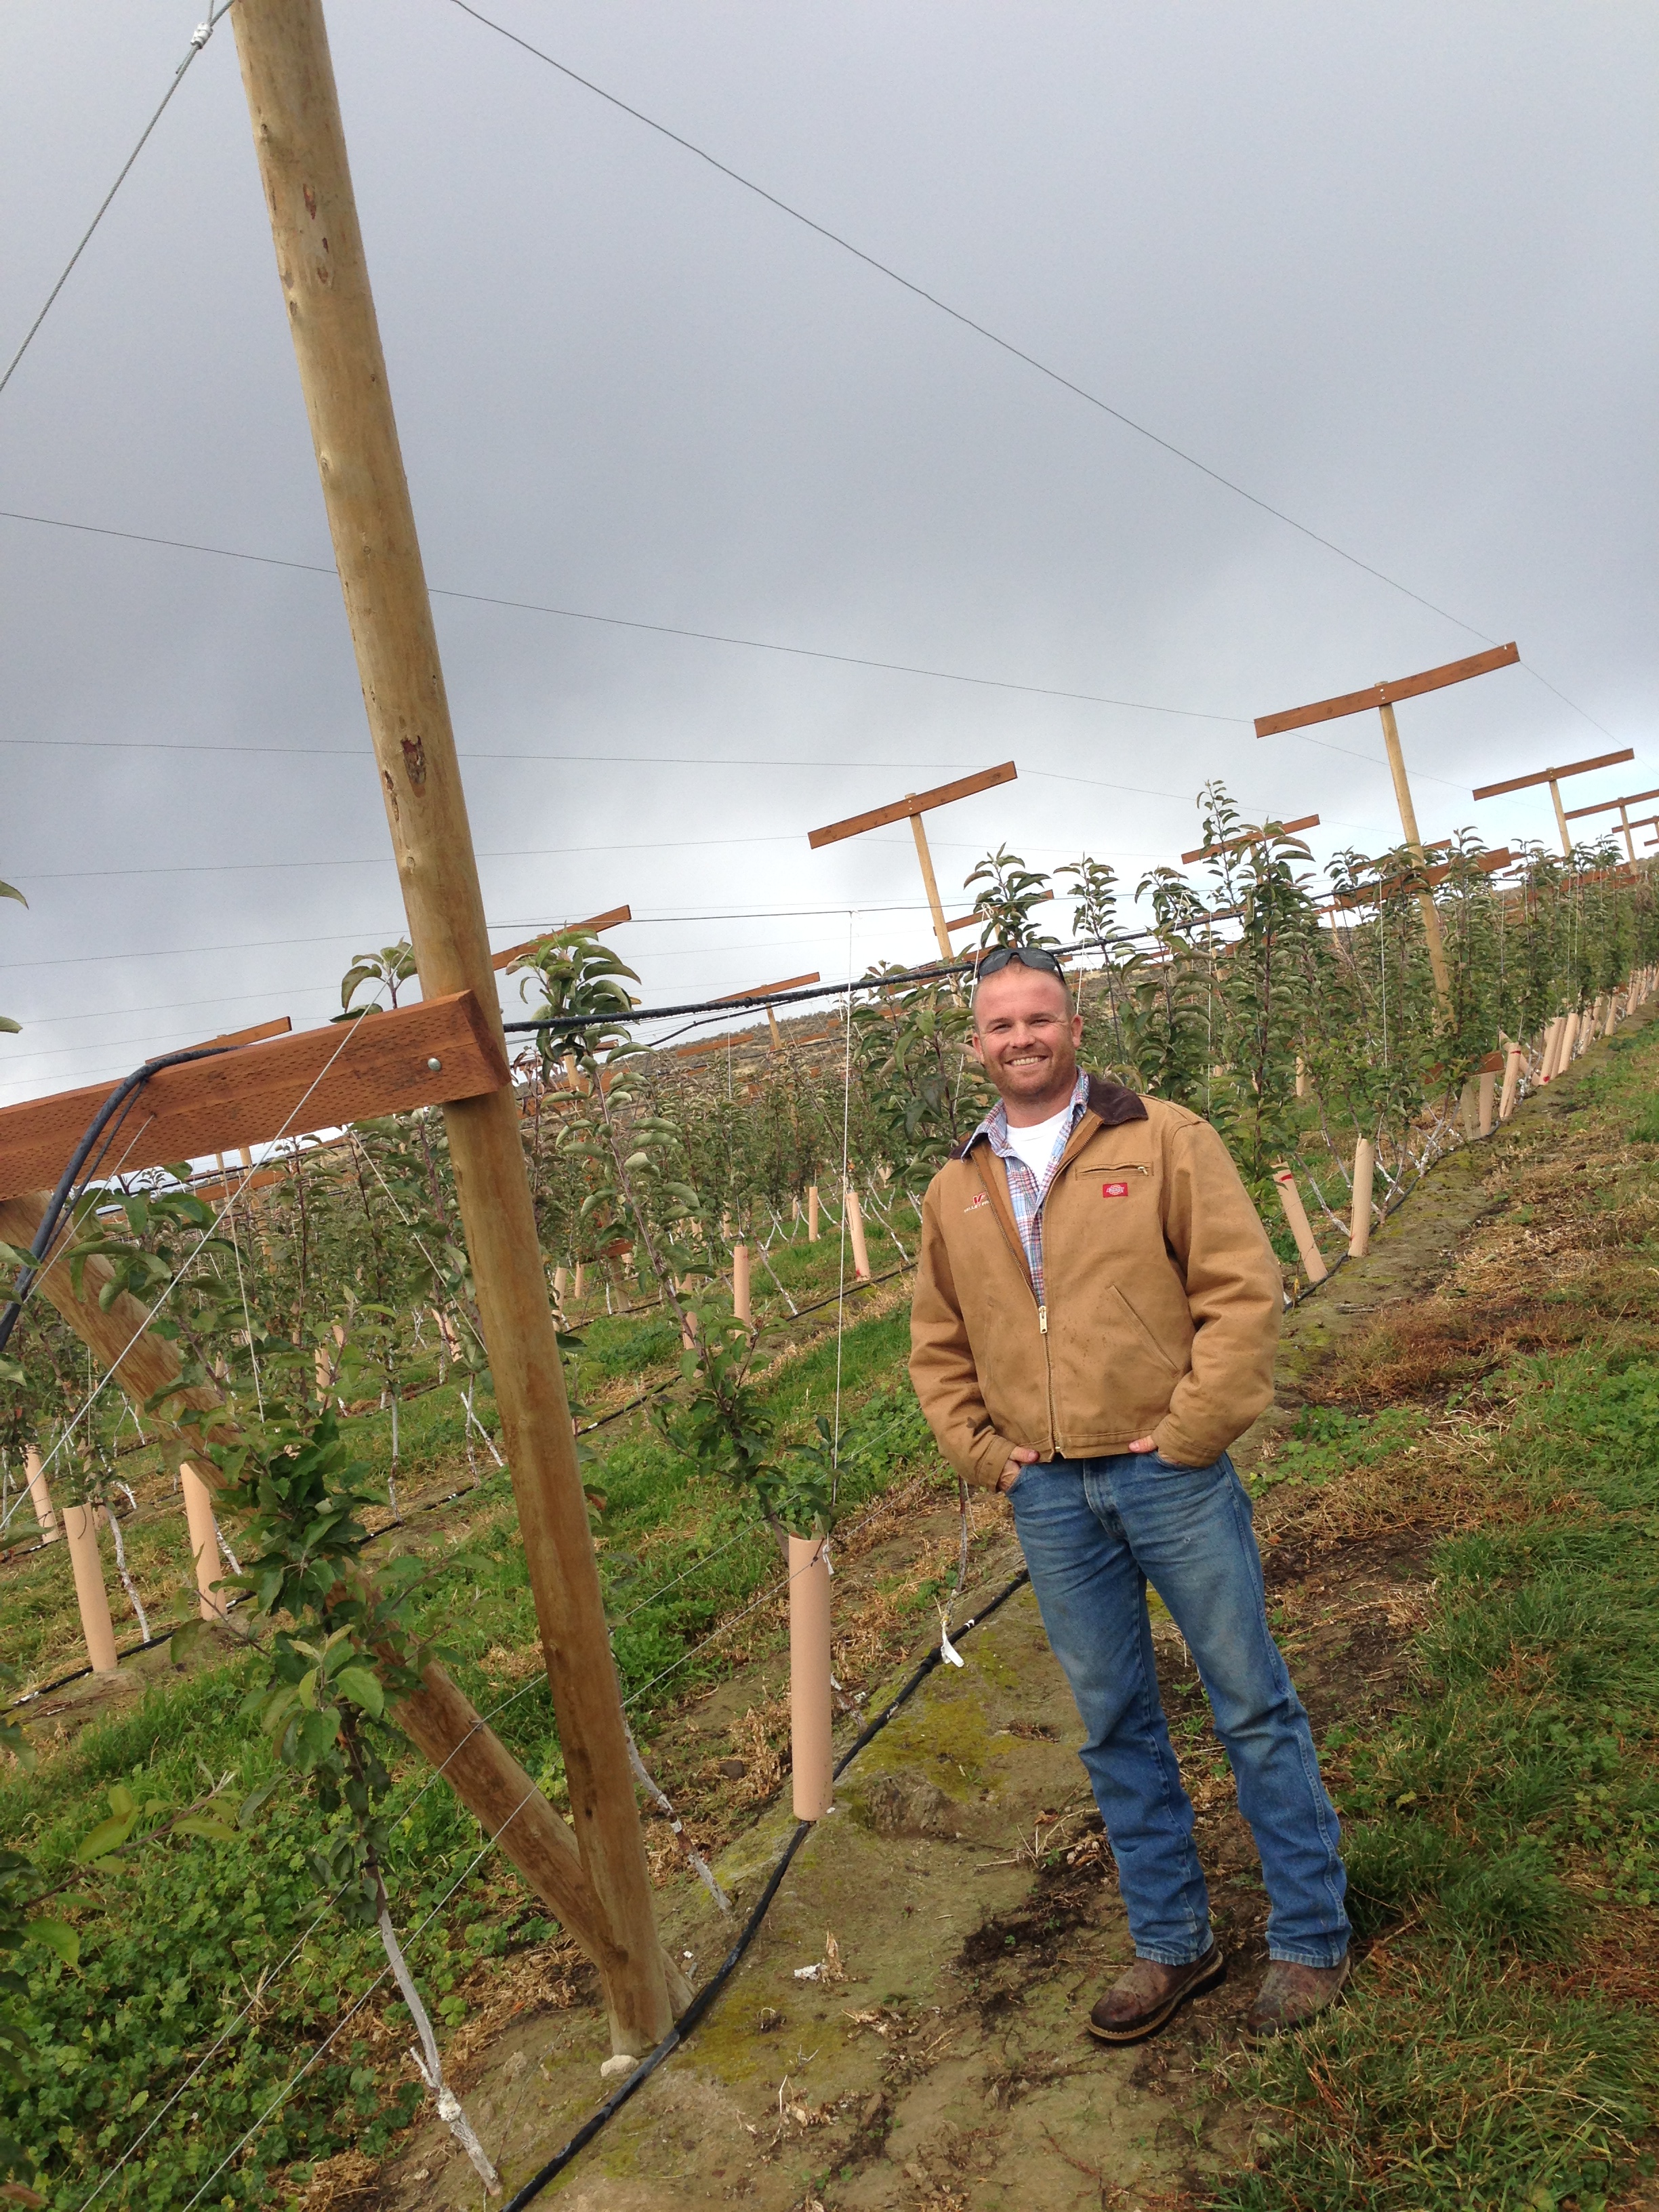 Andy is one of the field managers, he works hard to perfect the trellis systems, the color profiles of the apples, testing the pressures & brix (sugar levels), and so much more. Many would argue that the people like Andy are the heart & soul of the entire operation.